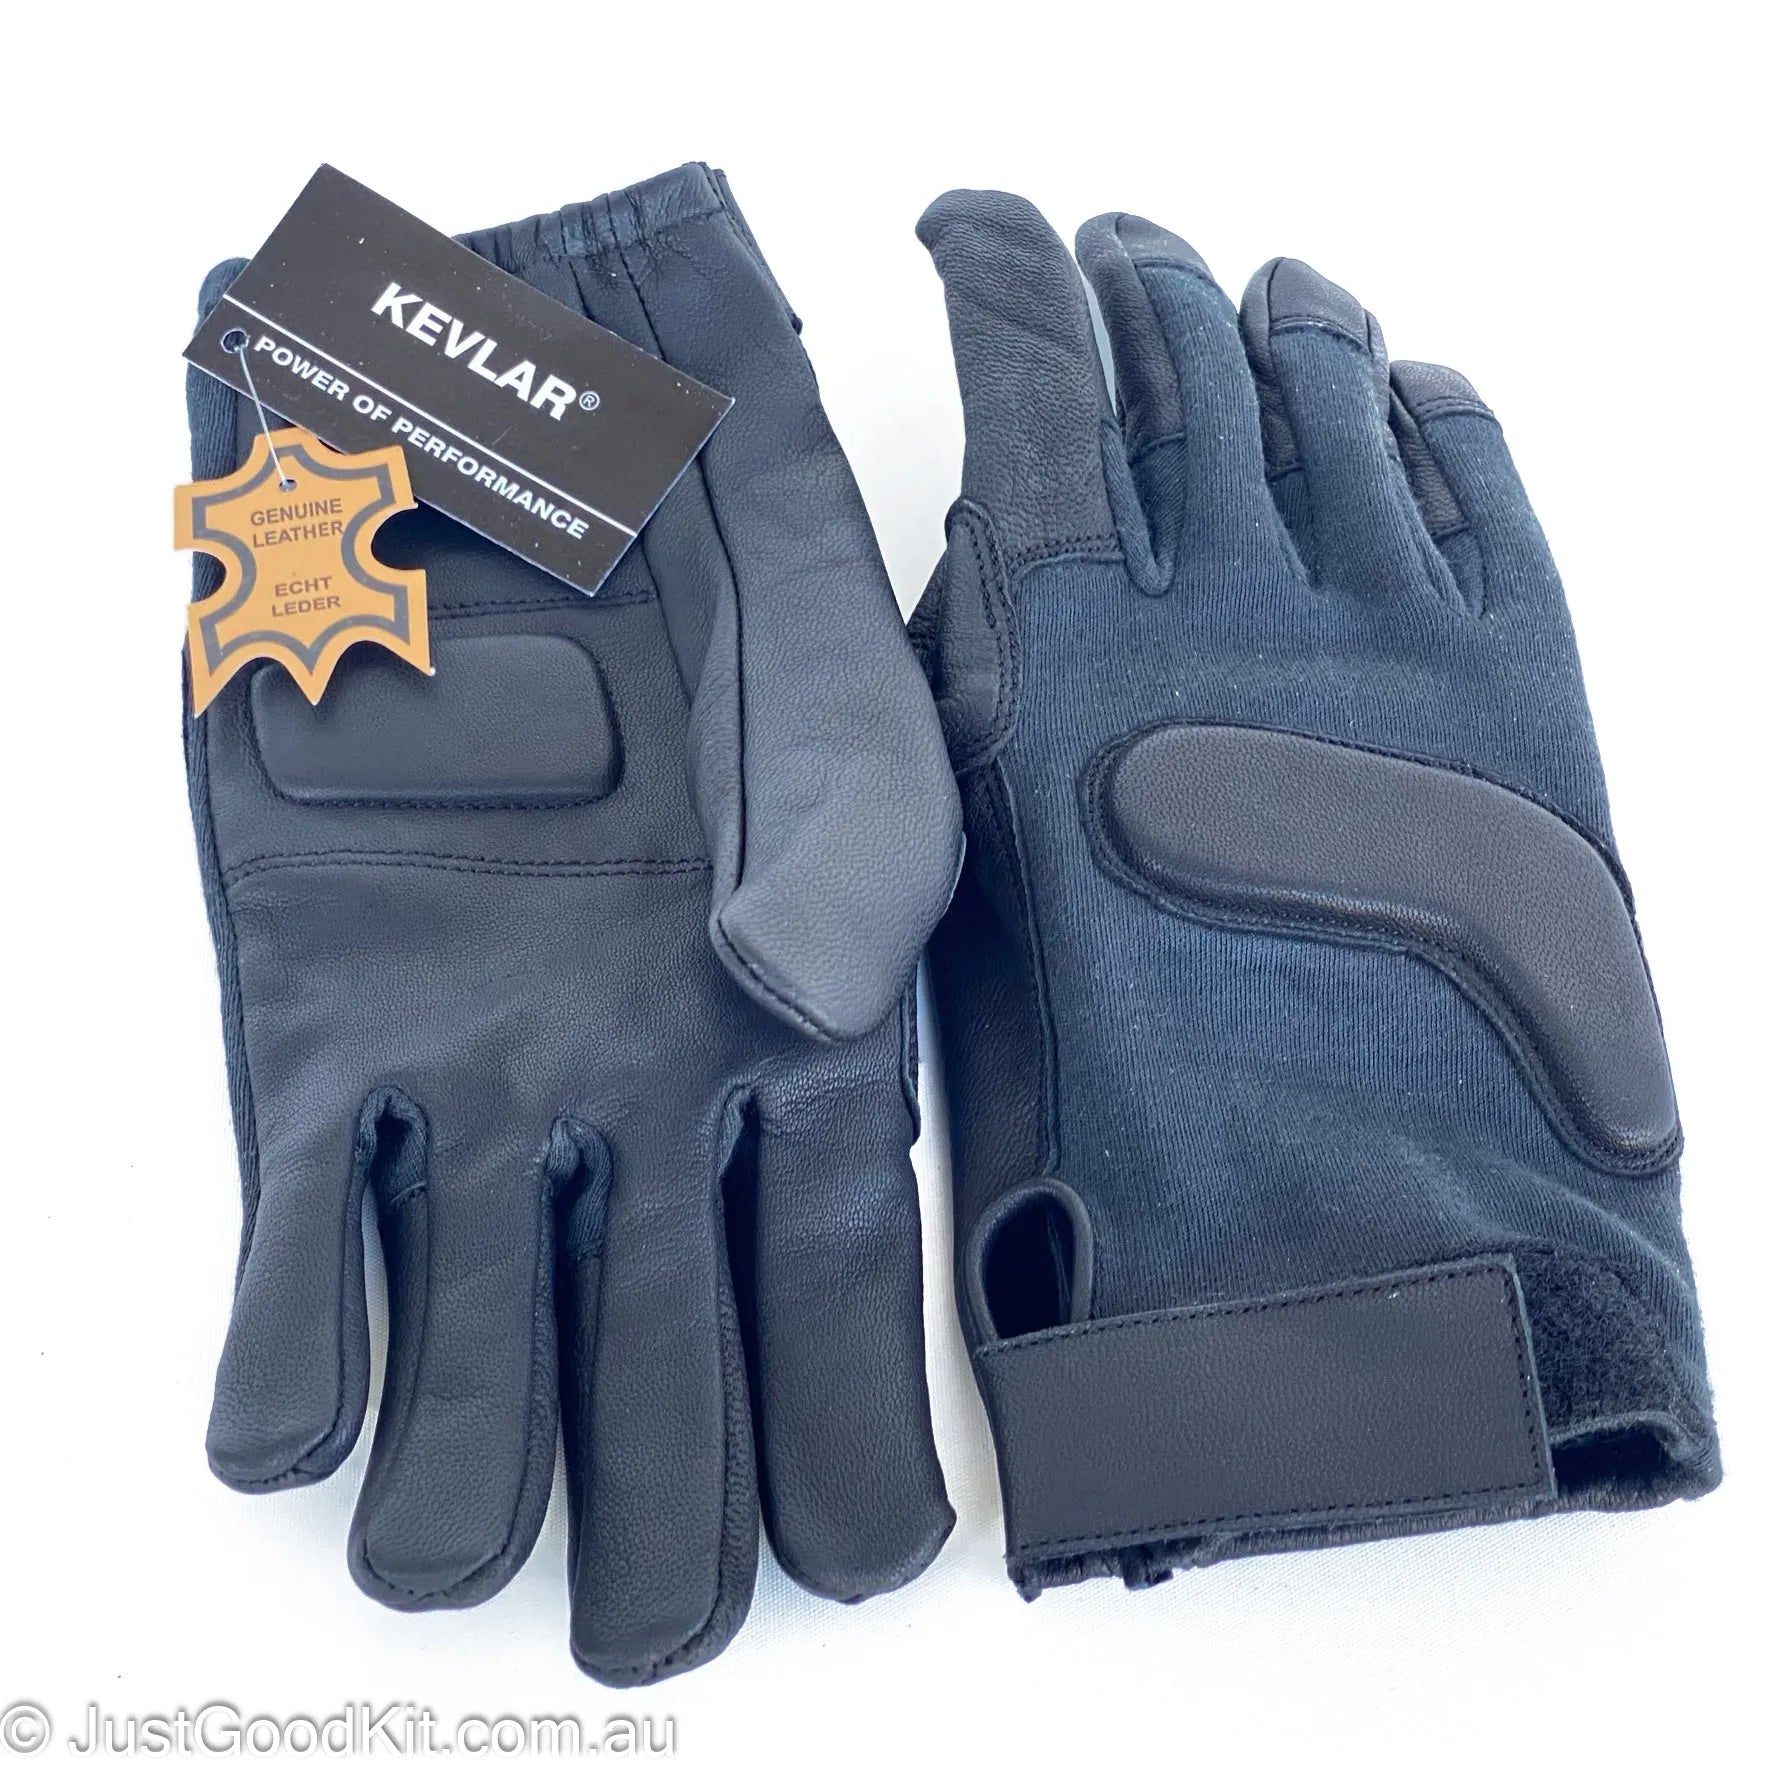 Tactical Gloves for Military and First Responders JustGoodKit Tactical Gloves for Military and First Responders Gloves